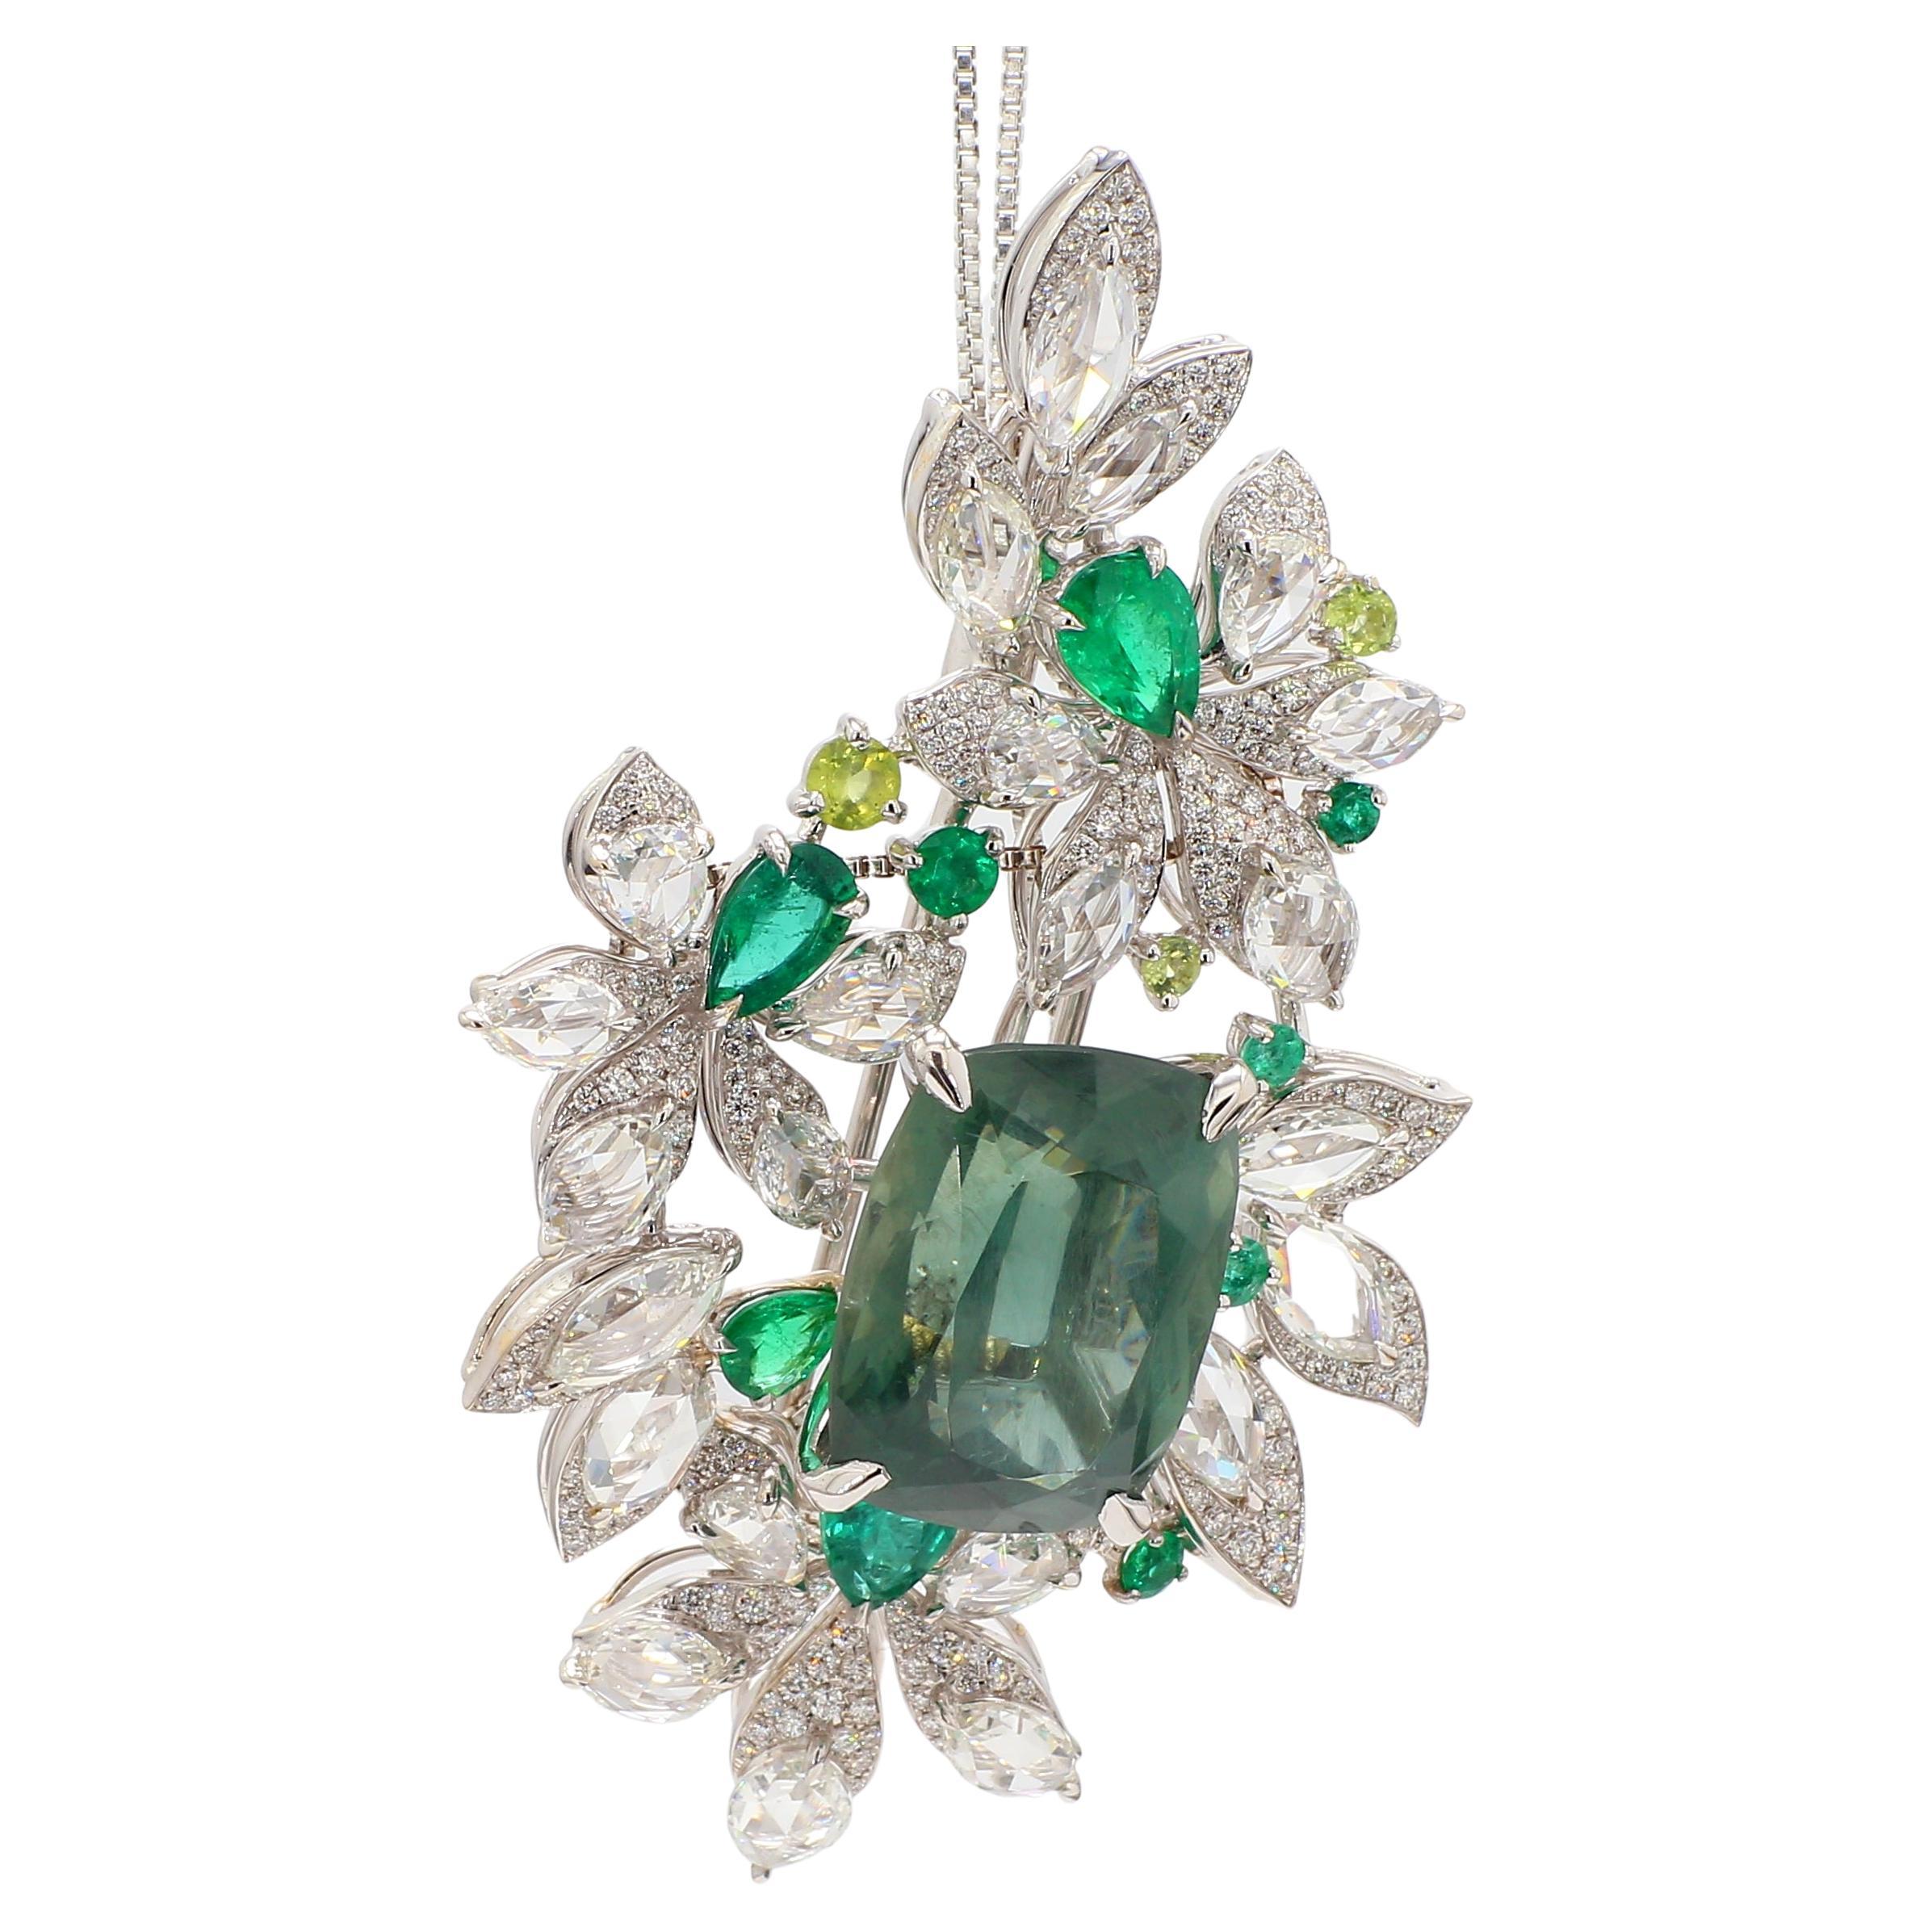 Radiant Cut 25.99 Carat Green Apatite, Diamonds and Emerald Brooch Set in 18k Gold GRS Cert. For Sale